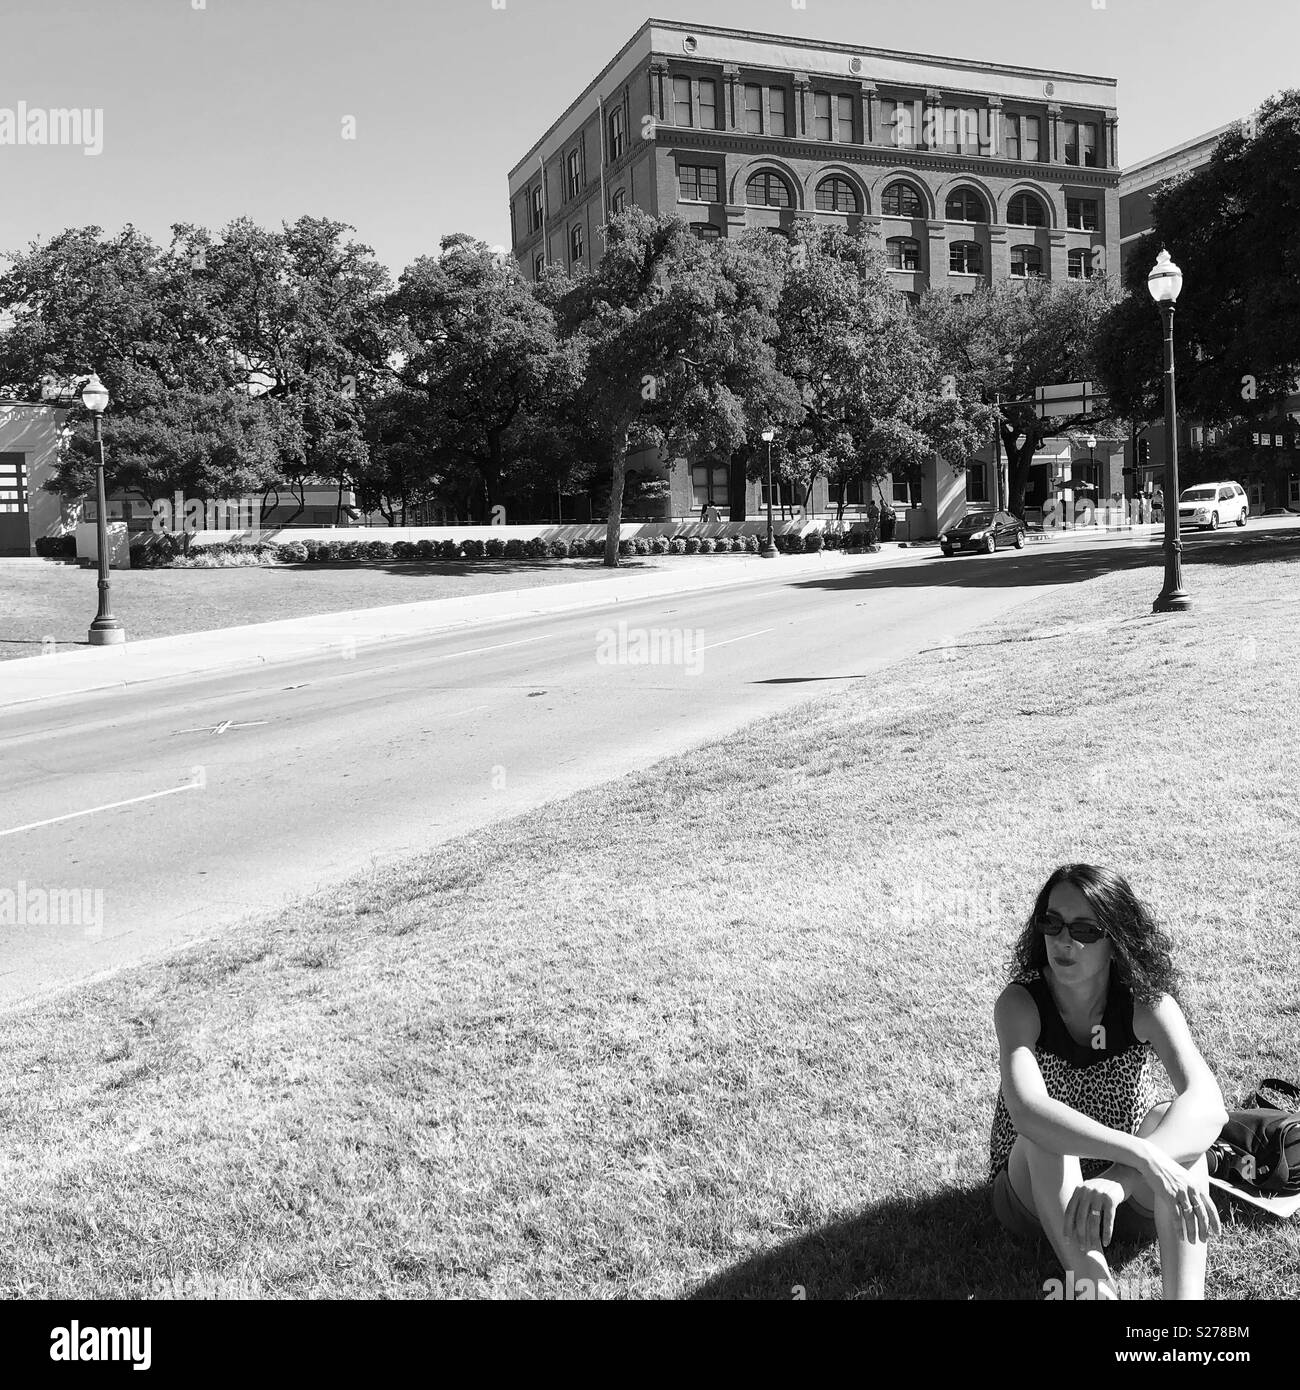 The ‘Grassy Knoll’ at Dealey Plaza, Dallas, Texas where you can see the ‘X’ in the road where Kennedy was assassinated and the Book Depository building in the background Stock Photo